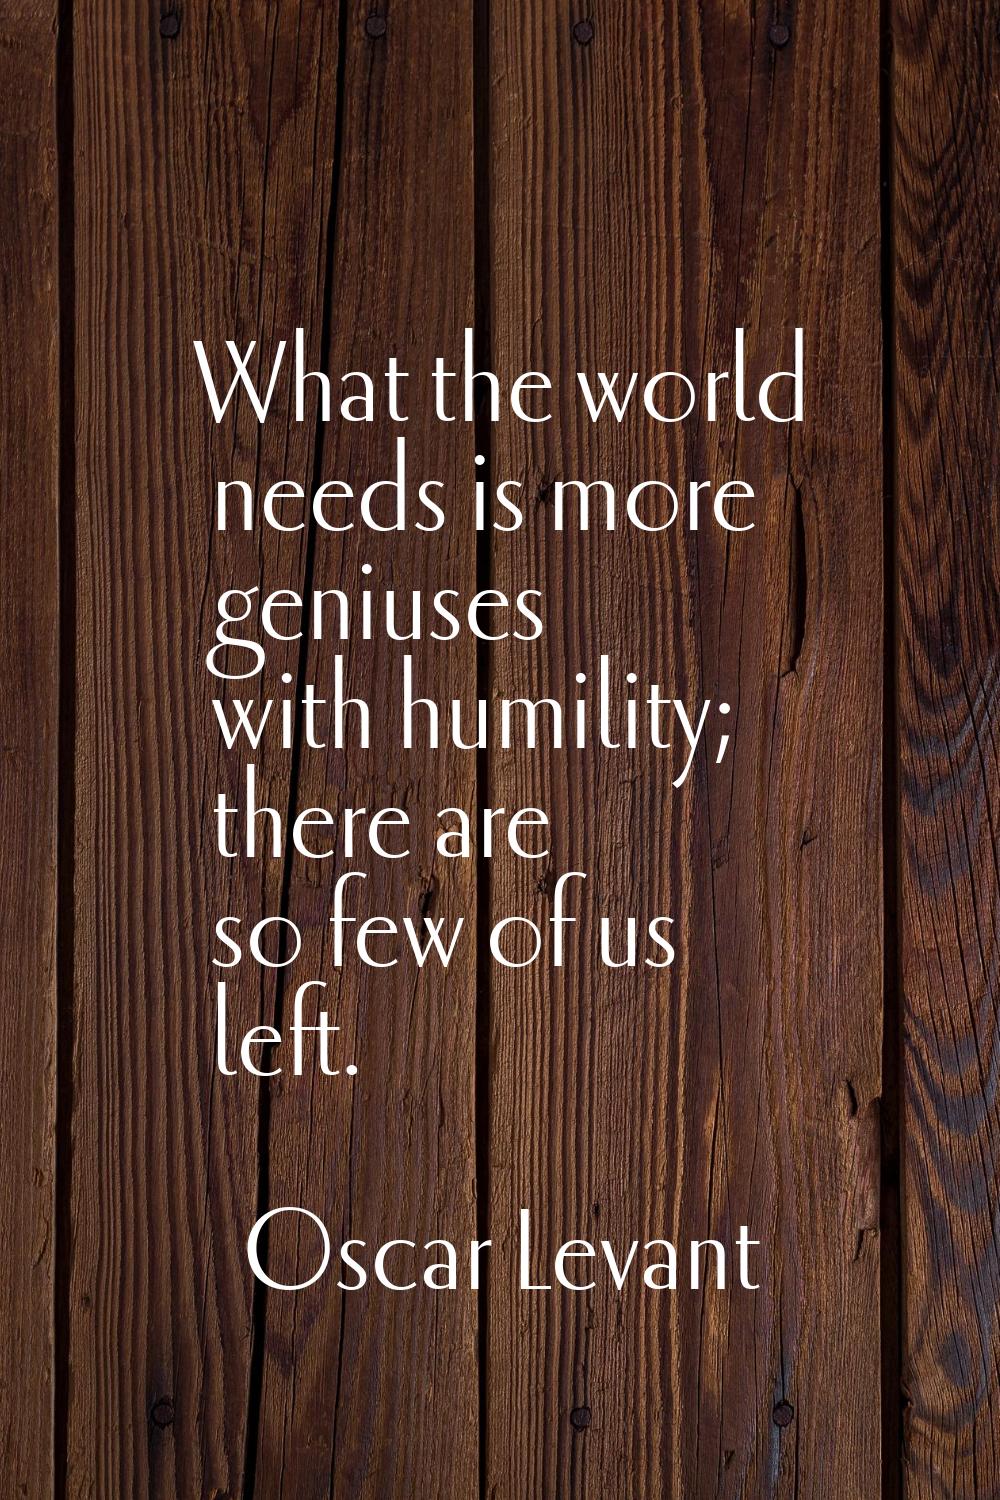 What the world needs is more geniuses with humility; there are so few of us left.